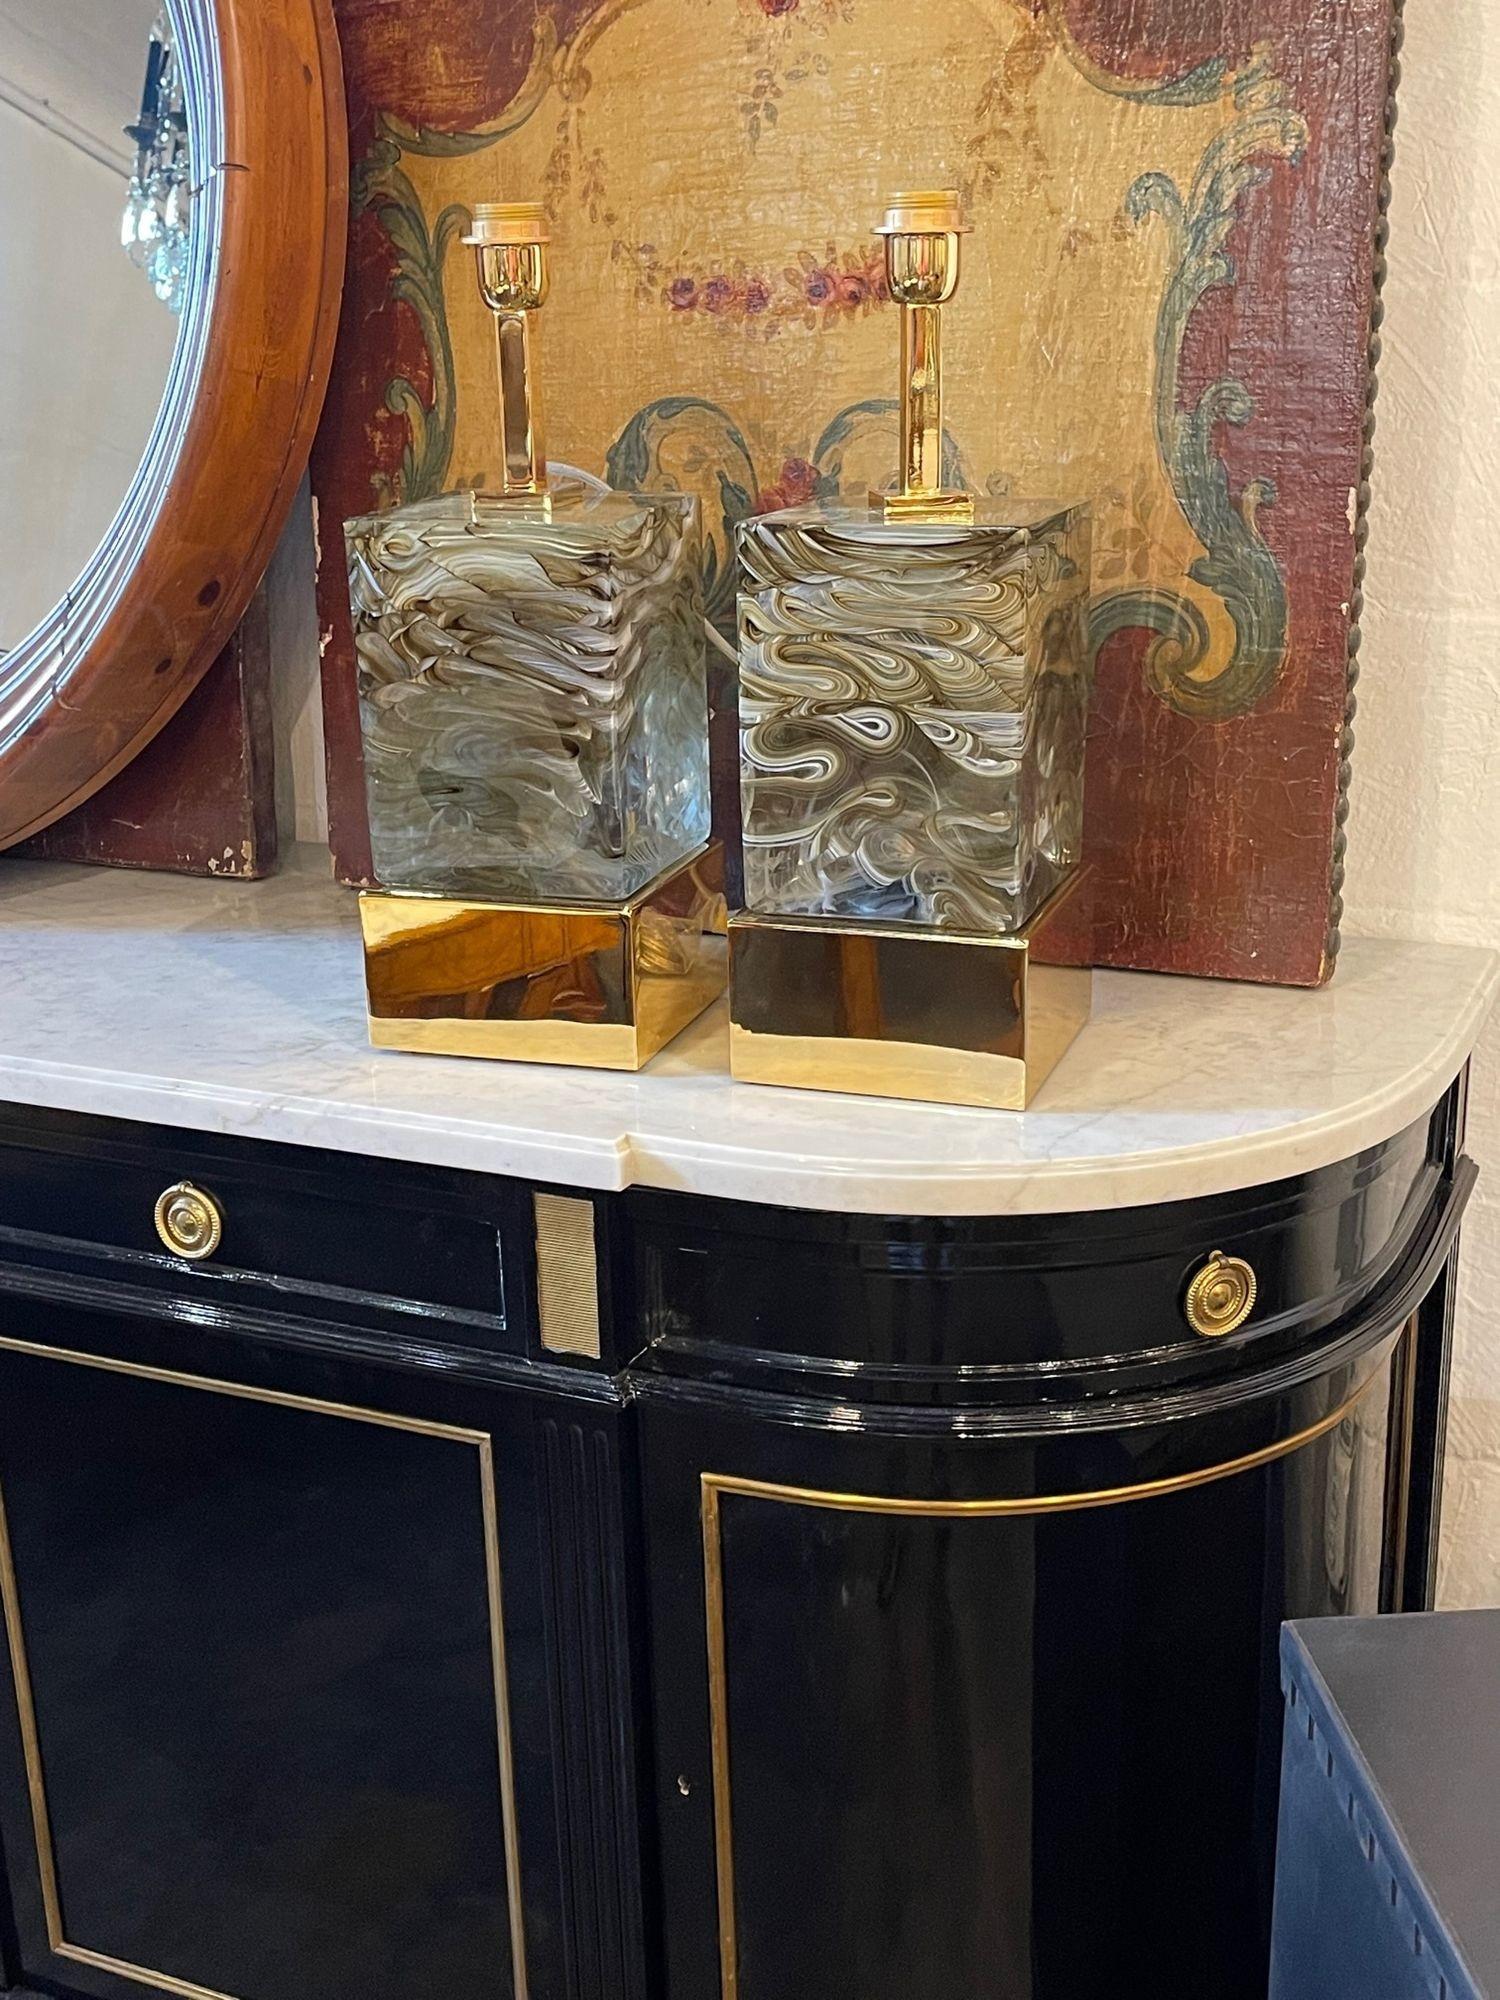 Stylish pair of modern Murano glass and brass lamps. Very heavy piece of glass with brown and white colors. So much depth and movement in this piece. Amazing!